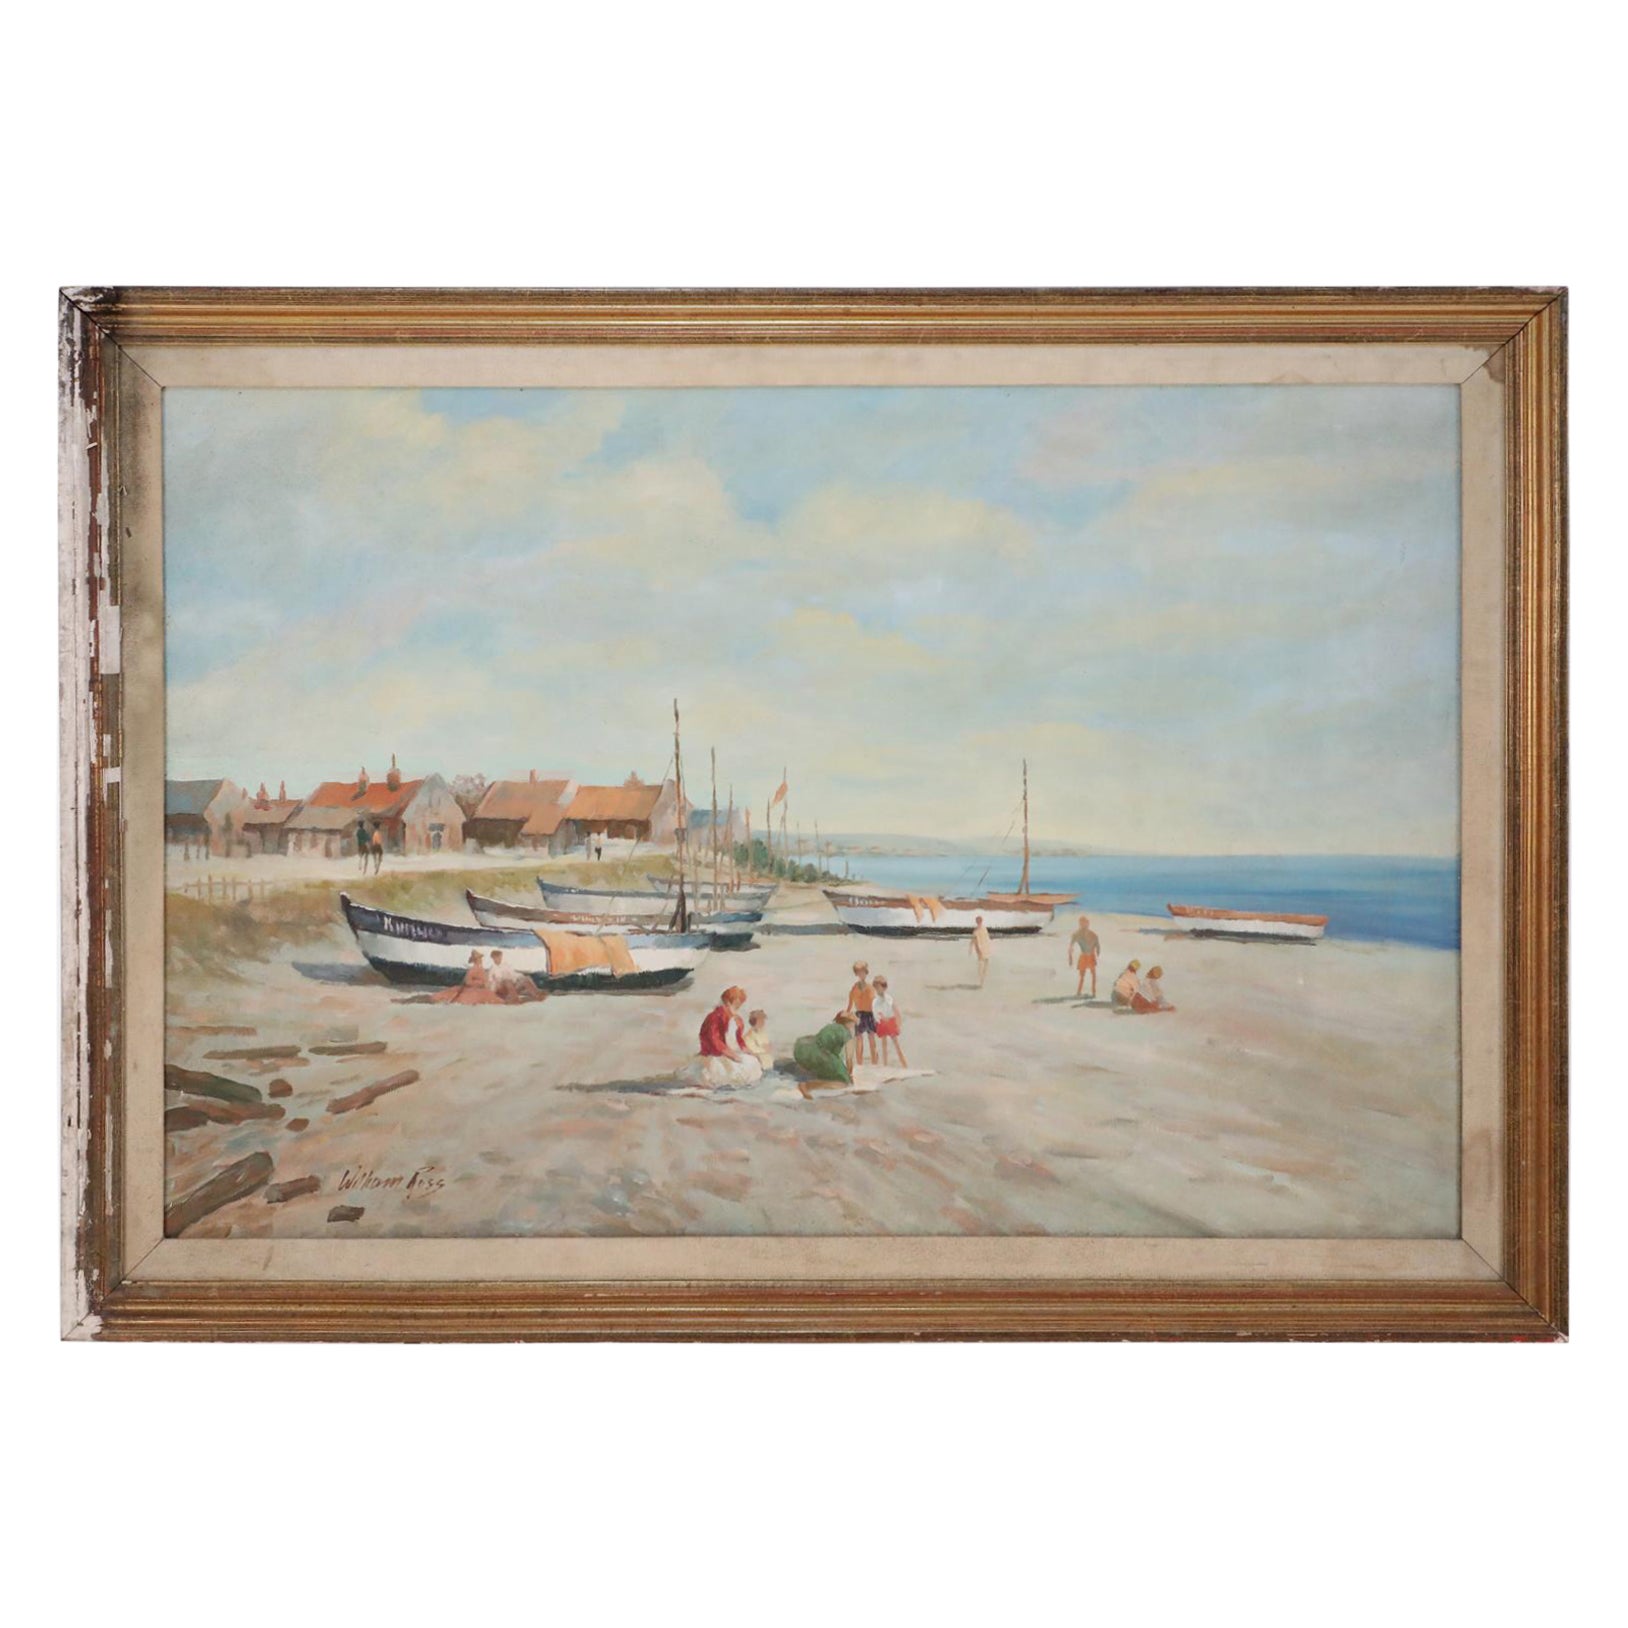 Framed Boats Ashore at Beach Seascape Oil Painting For Sale